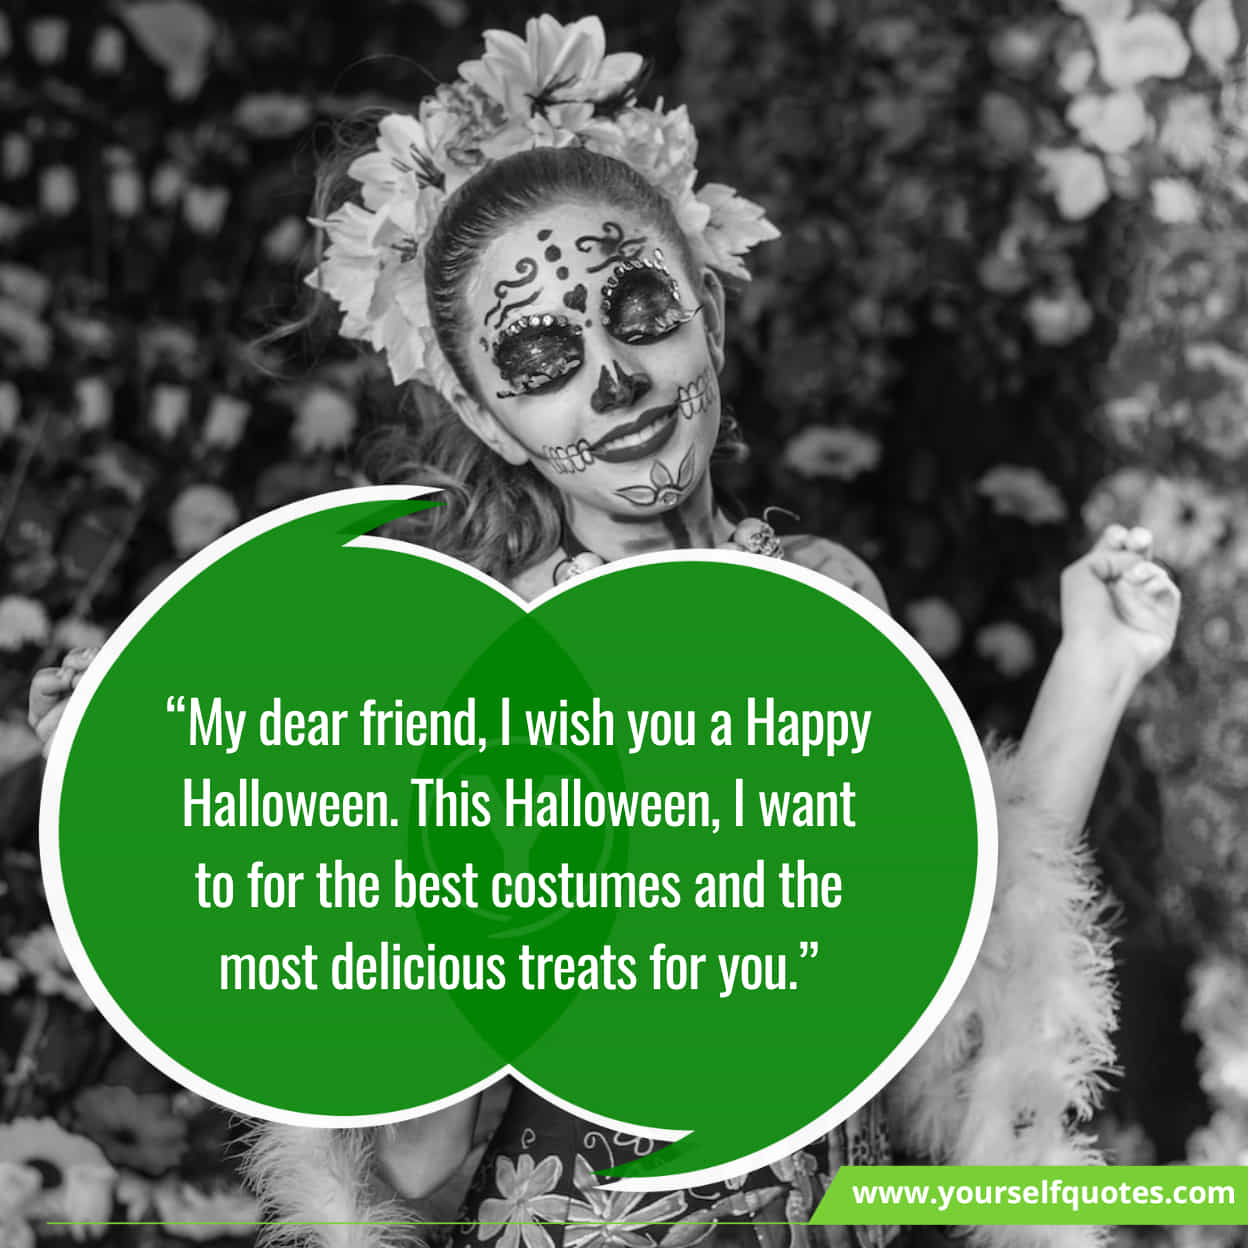 Alluring Wishes On Halloween For Friends